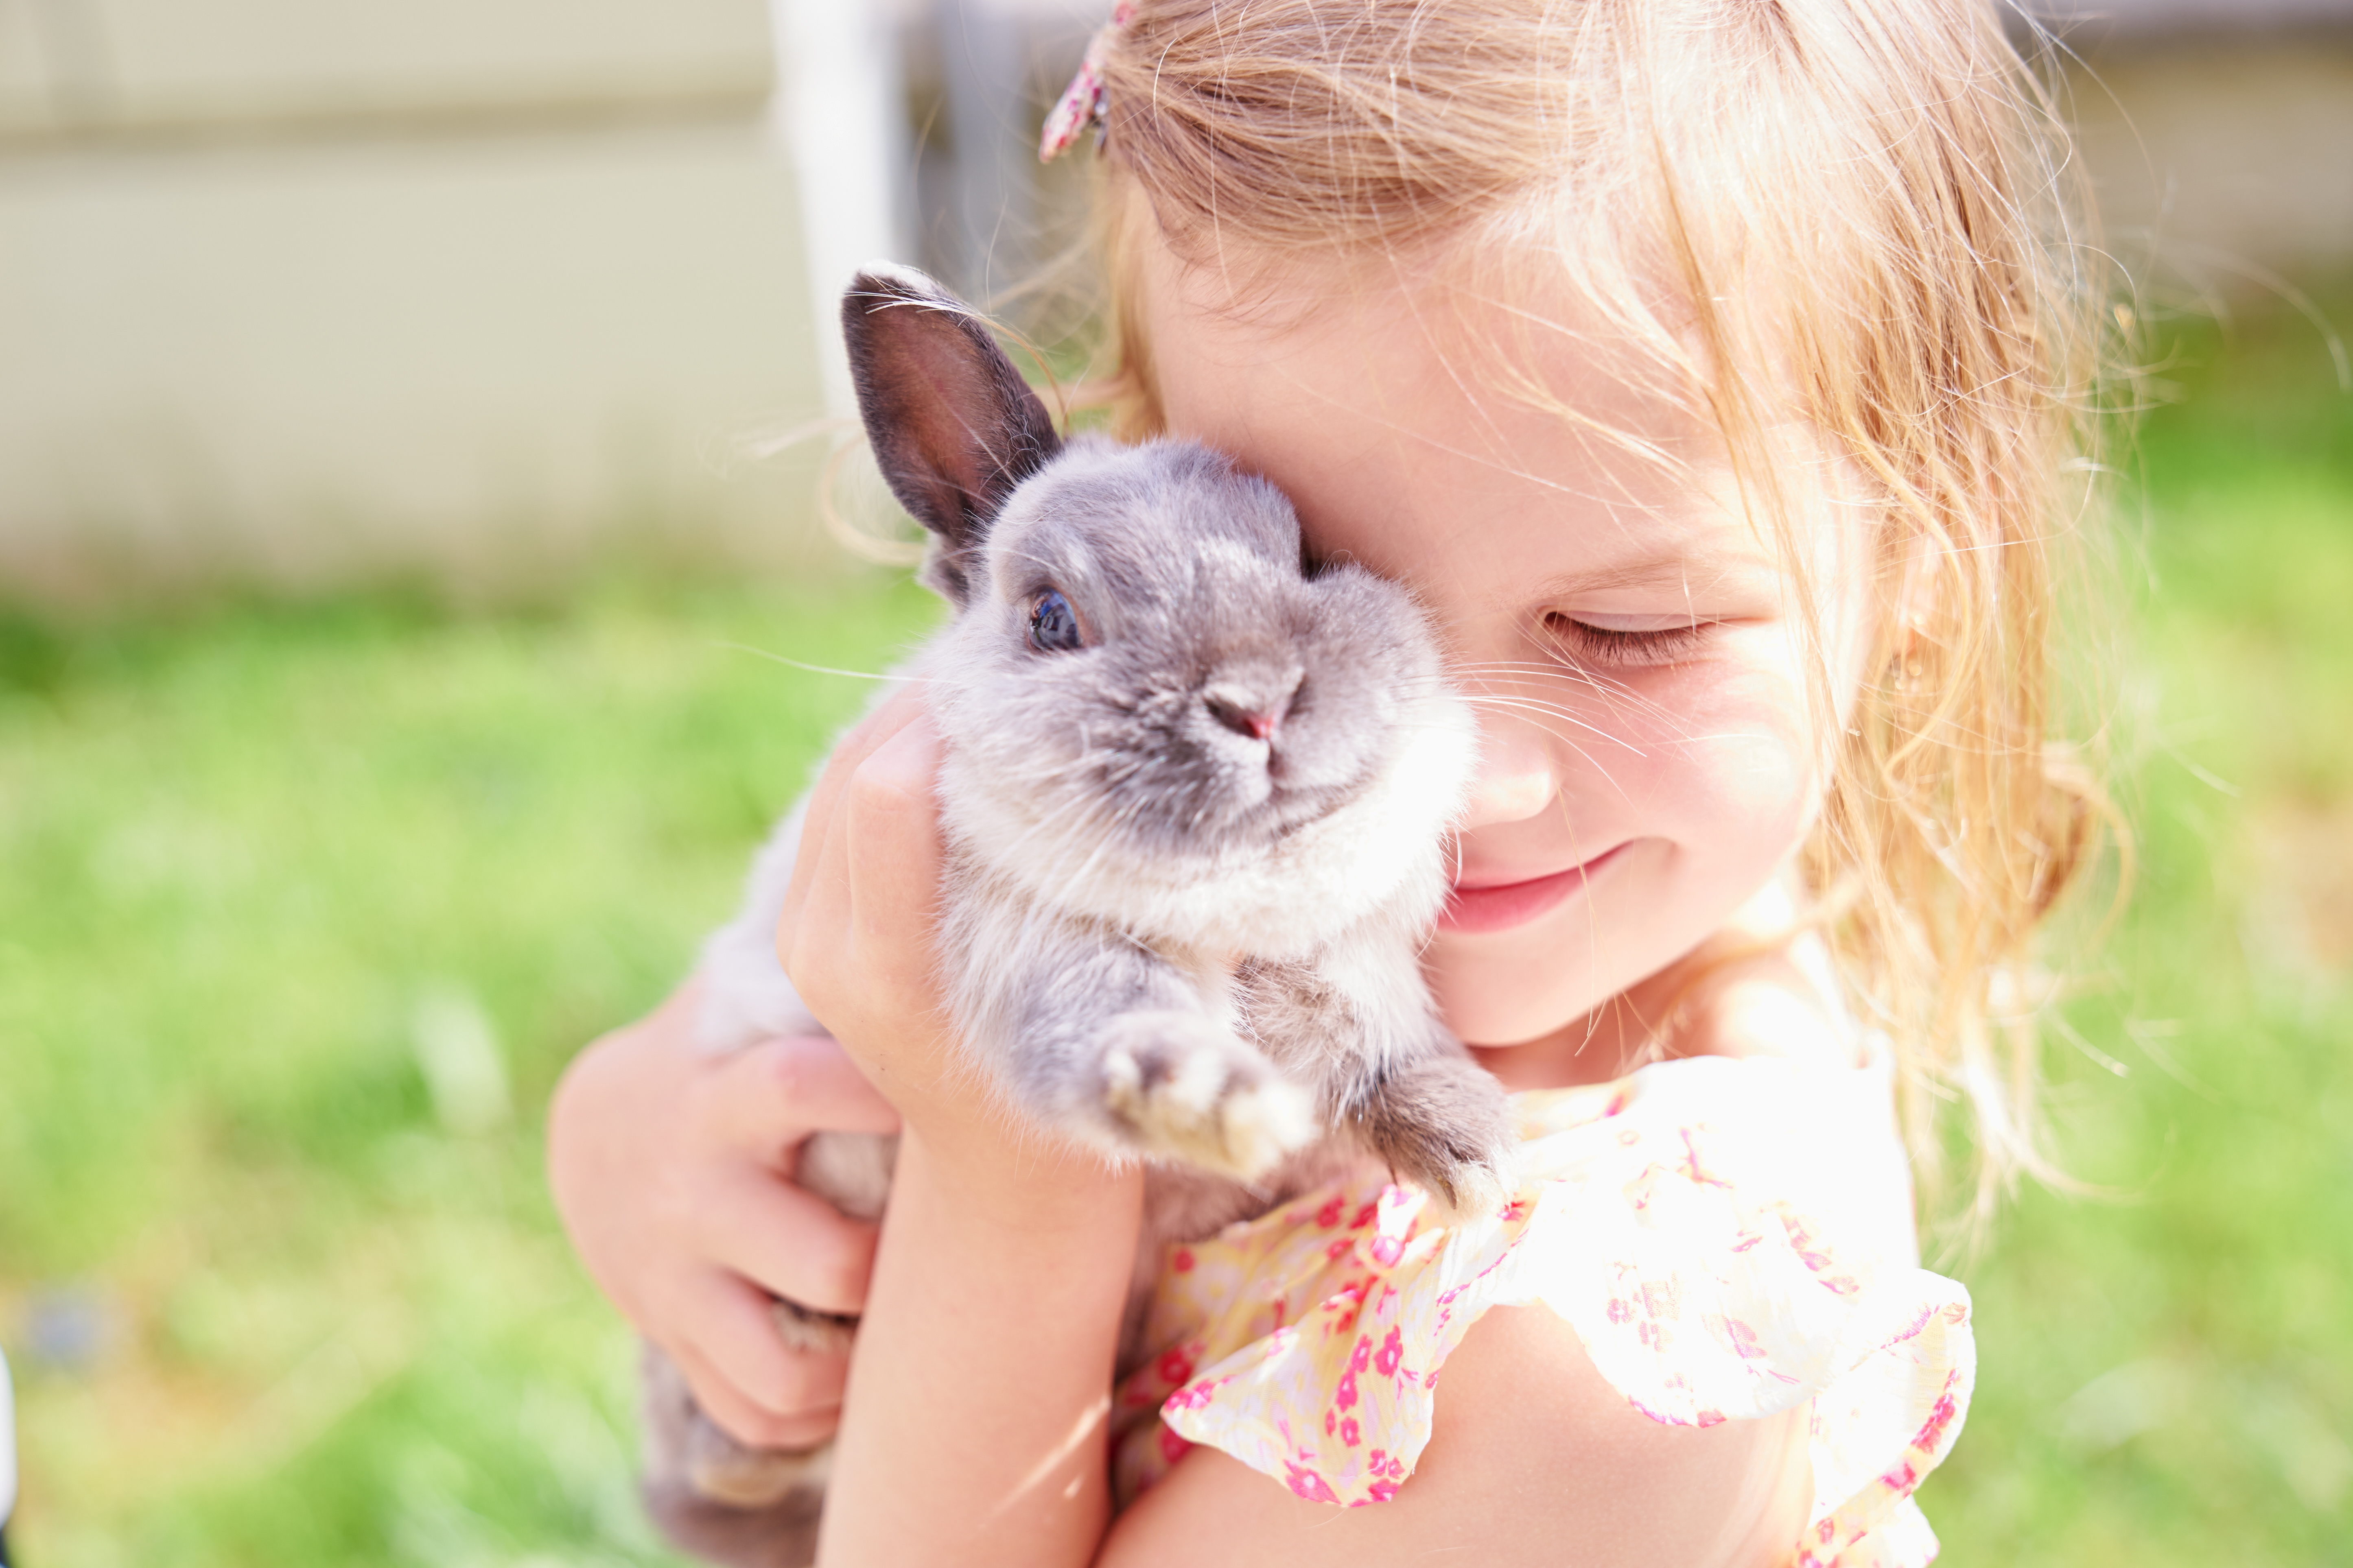 A girl and a rabbit